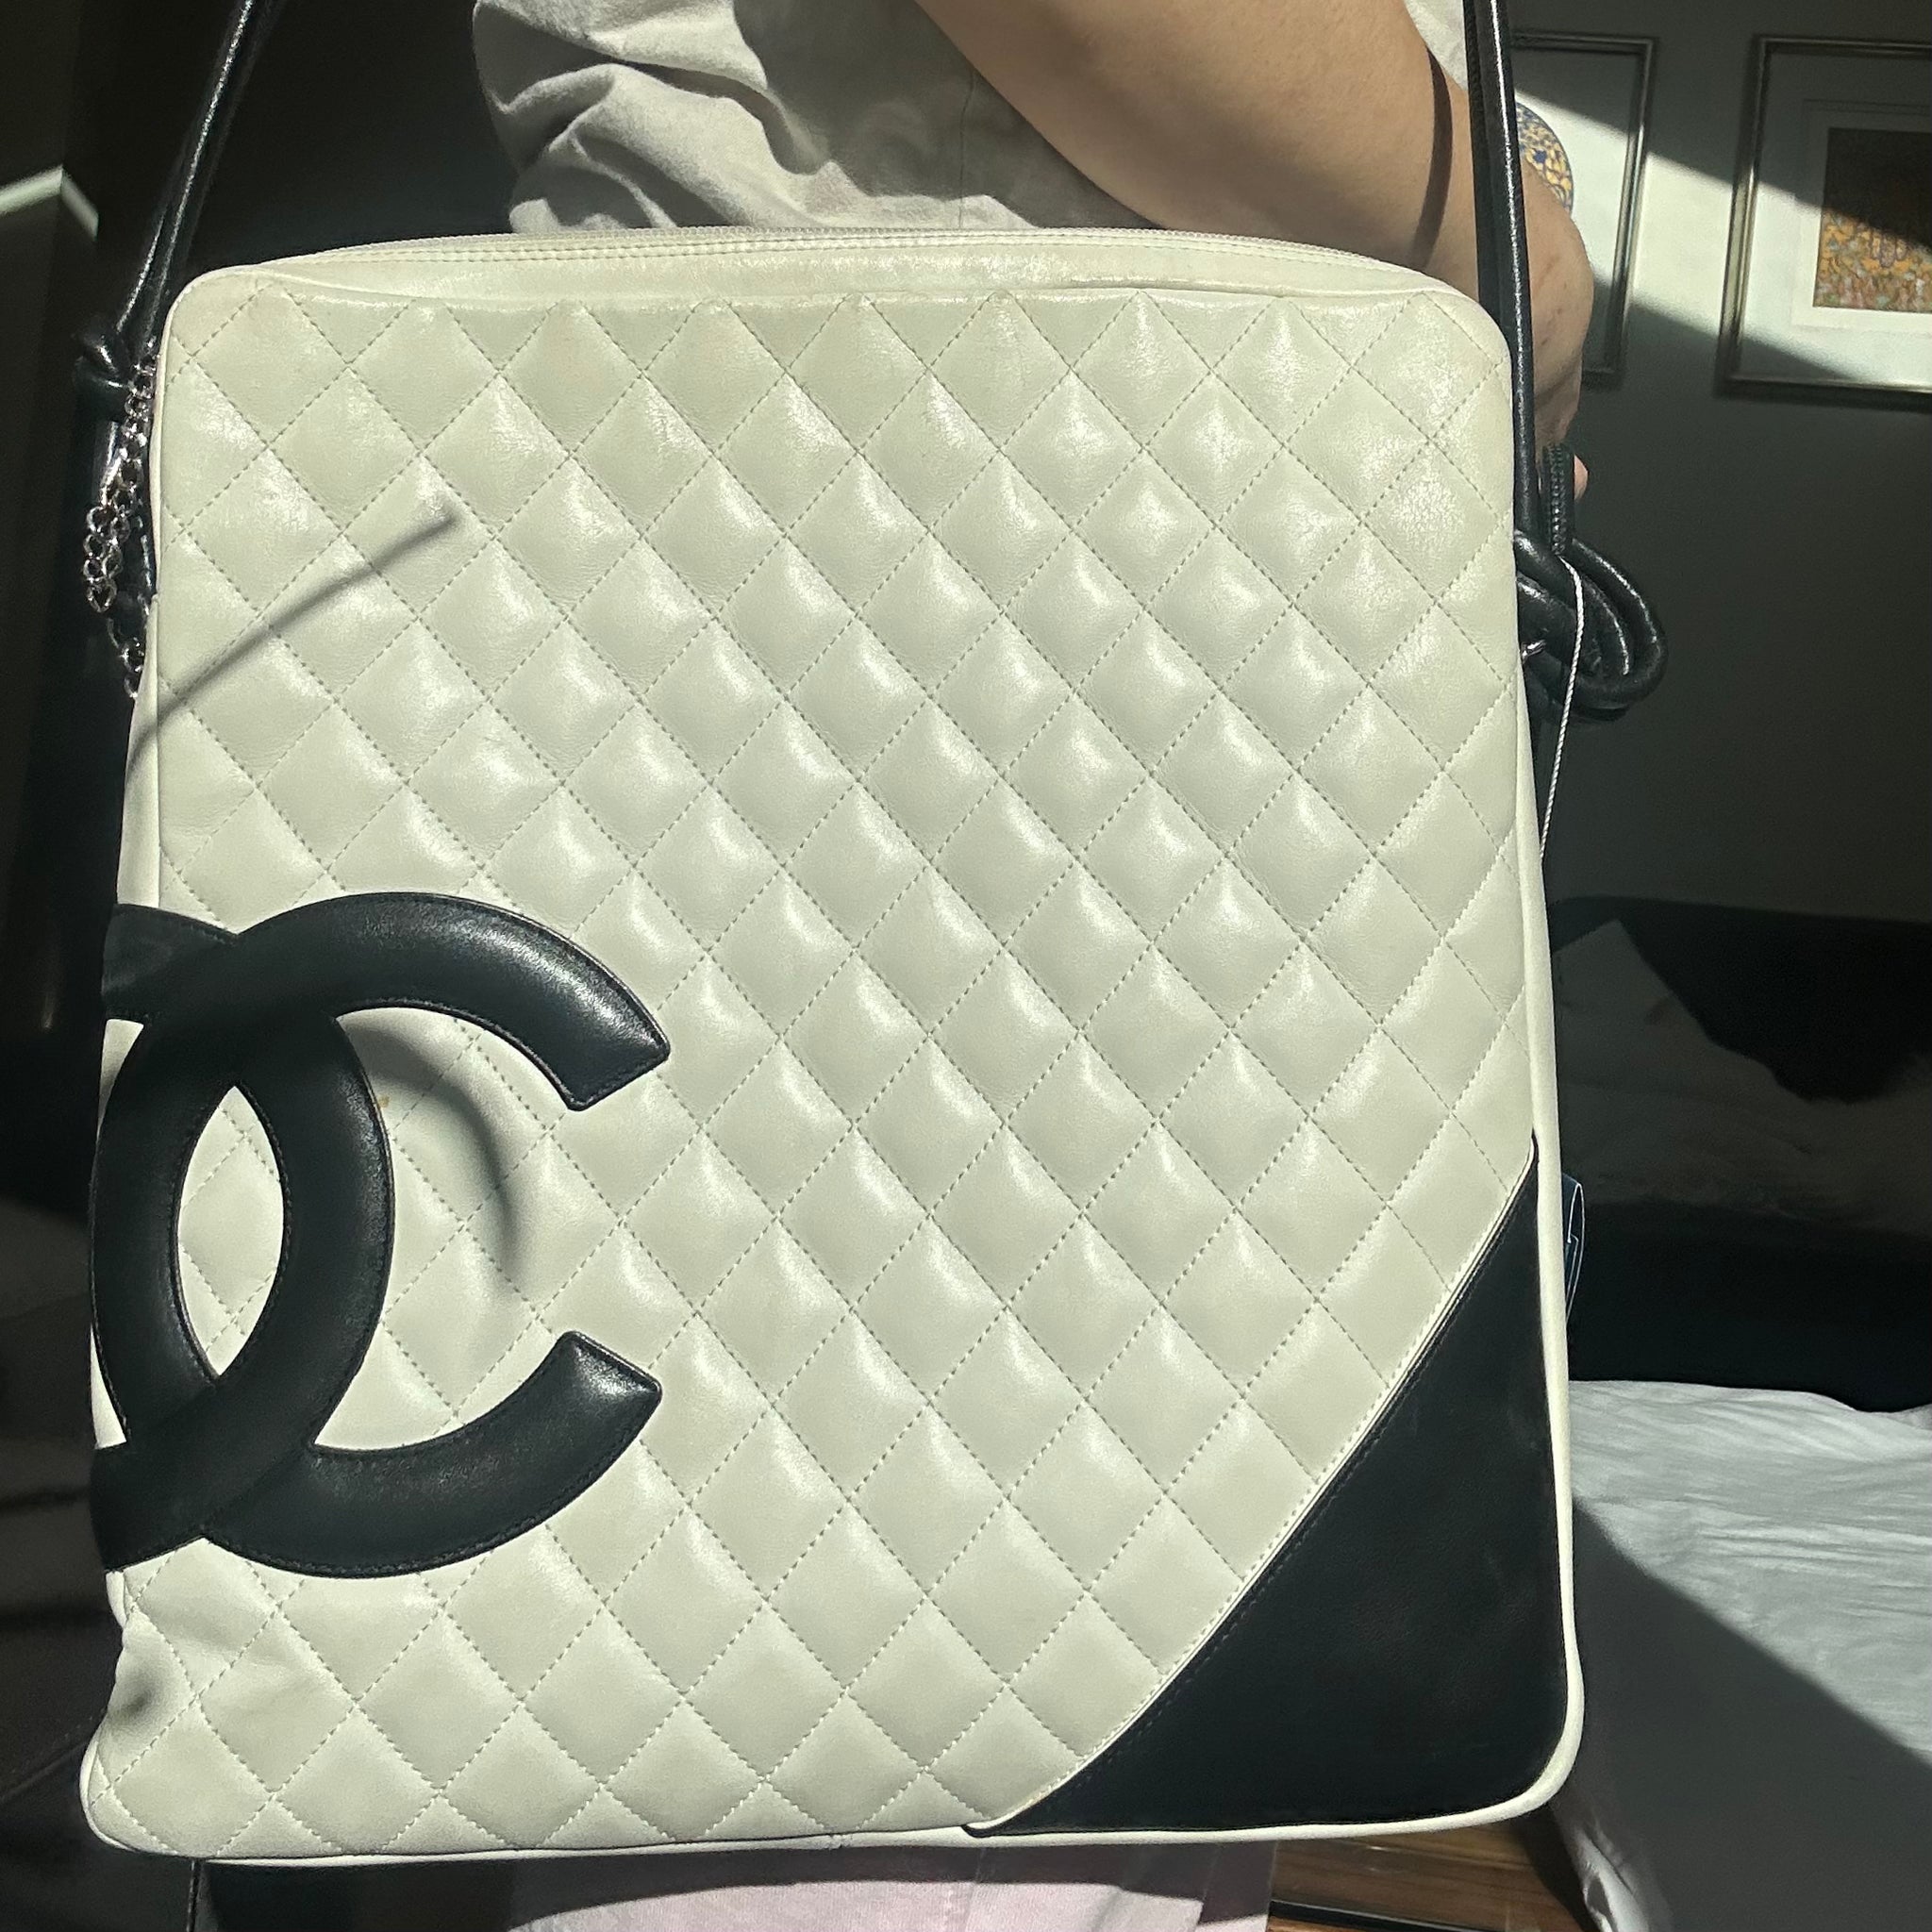 CHANEL, Bags, Authentic Chanel Cambon Tote